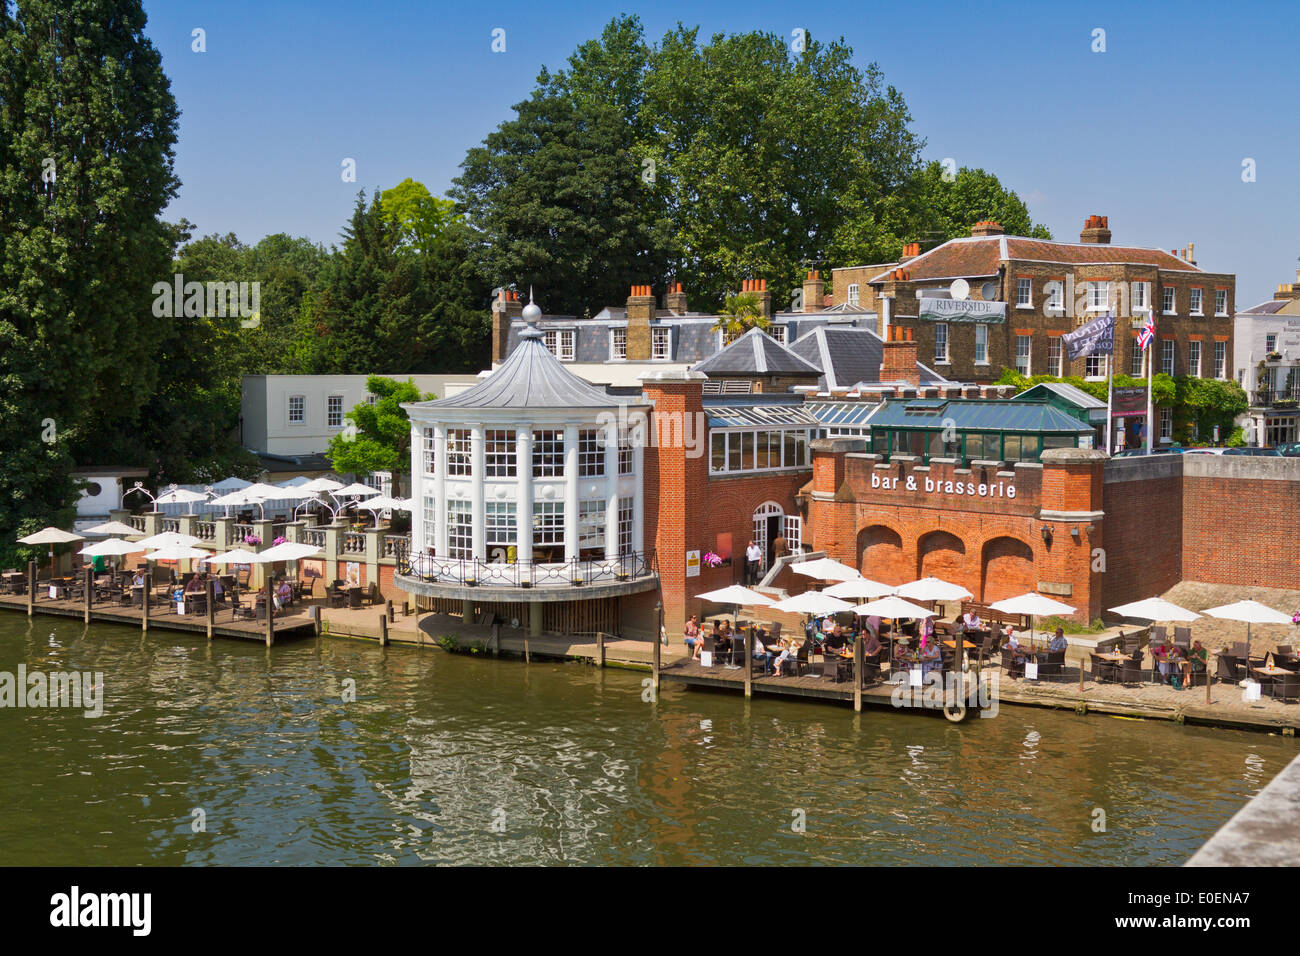 Carlton Mitre pub and restaurant - Hampton Court and the River Thames in July, 2013 Stock Photo